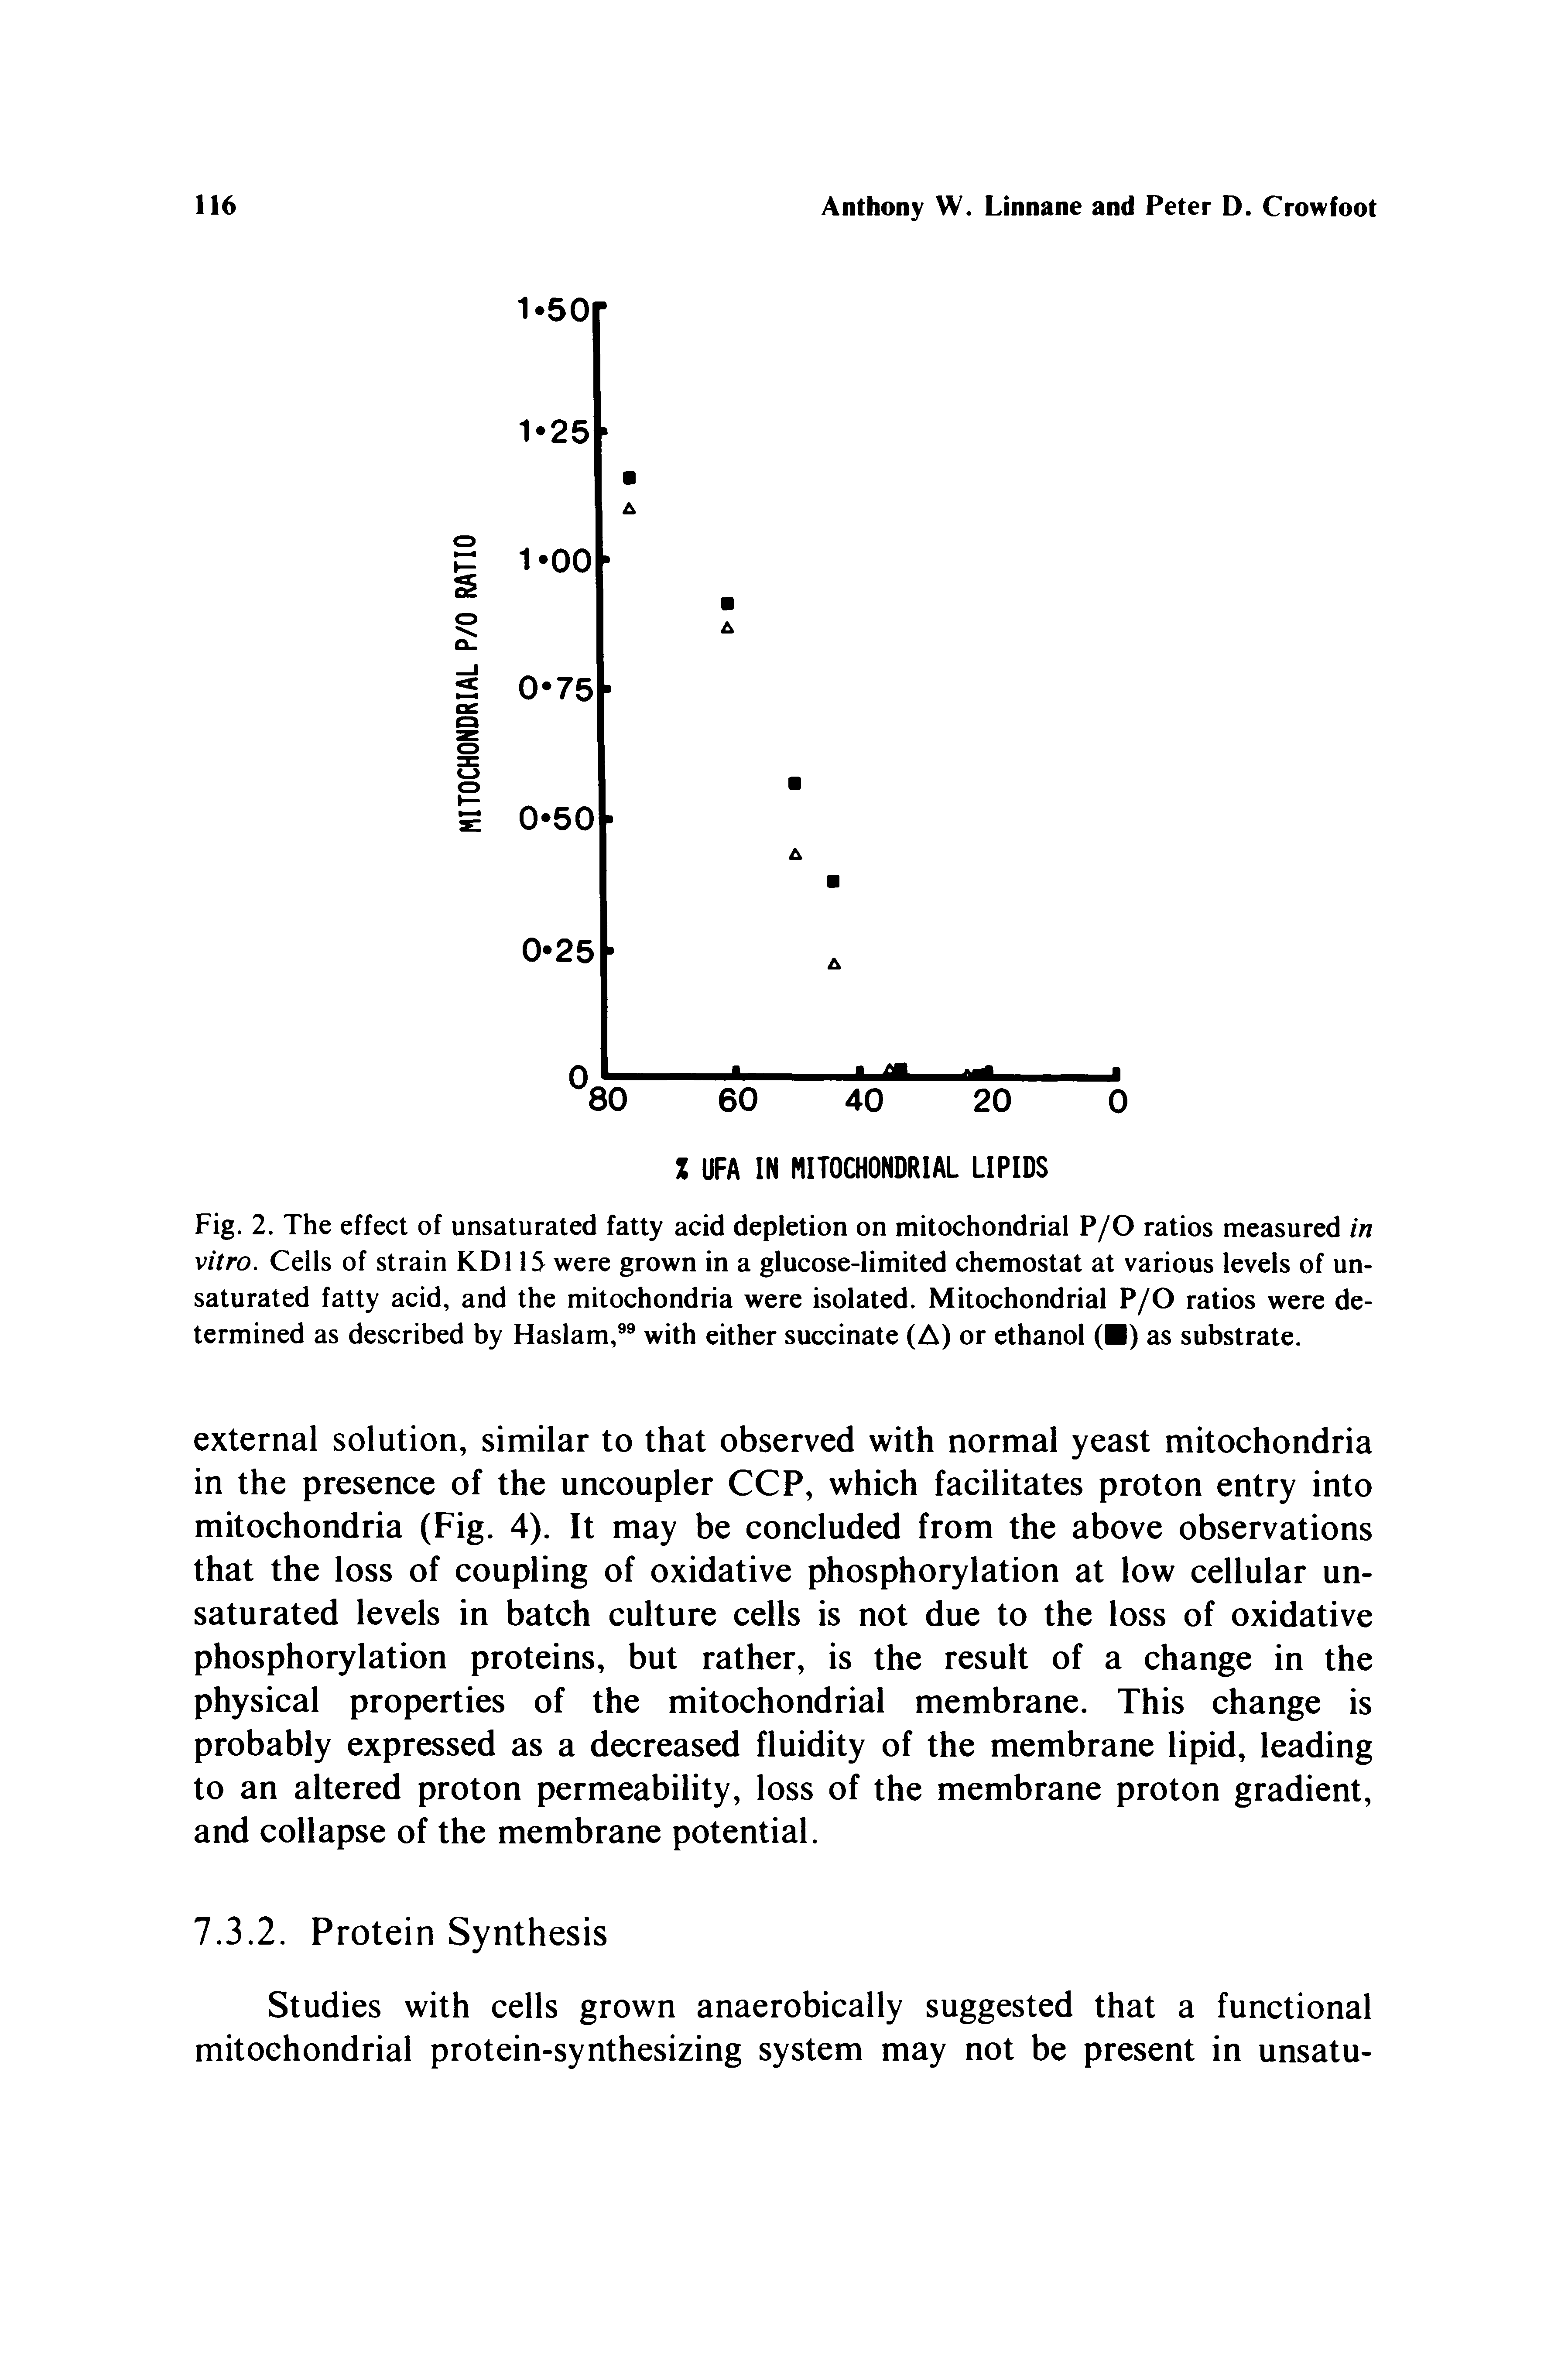 Fig. 2. The effect of unsaturated fatty acid depletion on mitochondrial P/O ratios measured in vitro. Cells of strain KDl 15 were grown in a glucose-limited chemostat at various levels of unsaturated fatty acid, and the mitochondria were isolated. Mitochondrial P/O ratios were determined as described by Haslam, with either succinate (A) or ethanol ( ) as substrate.